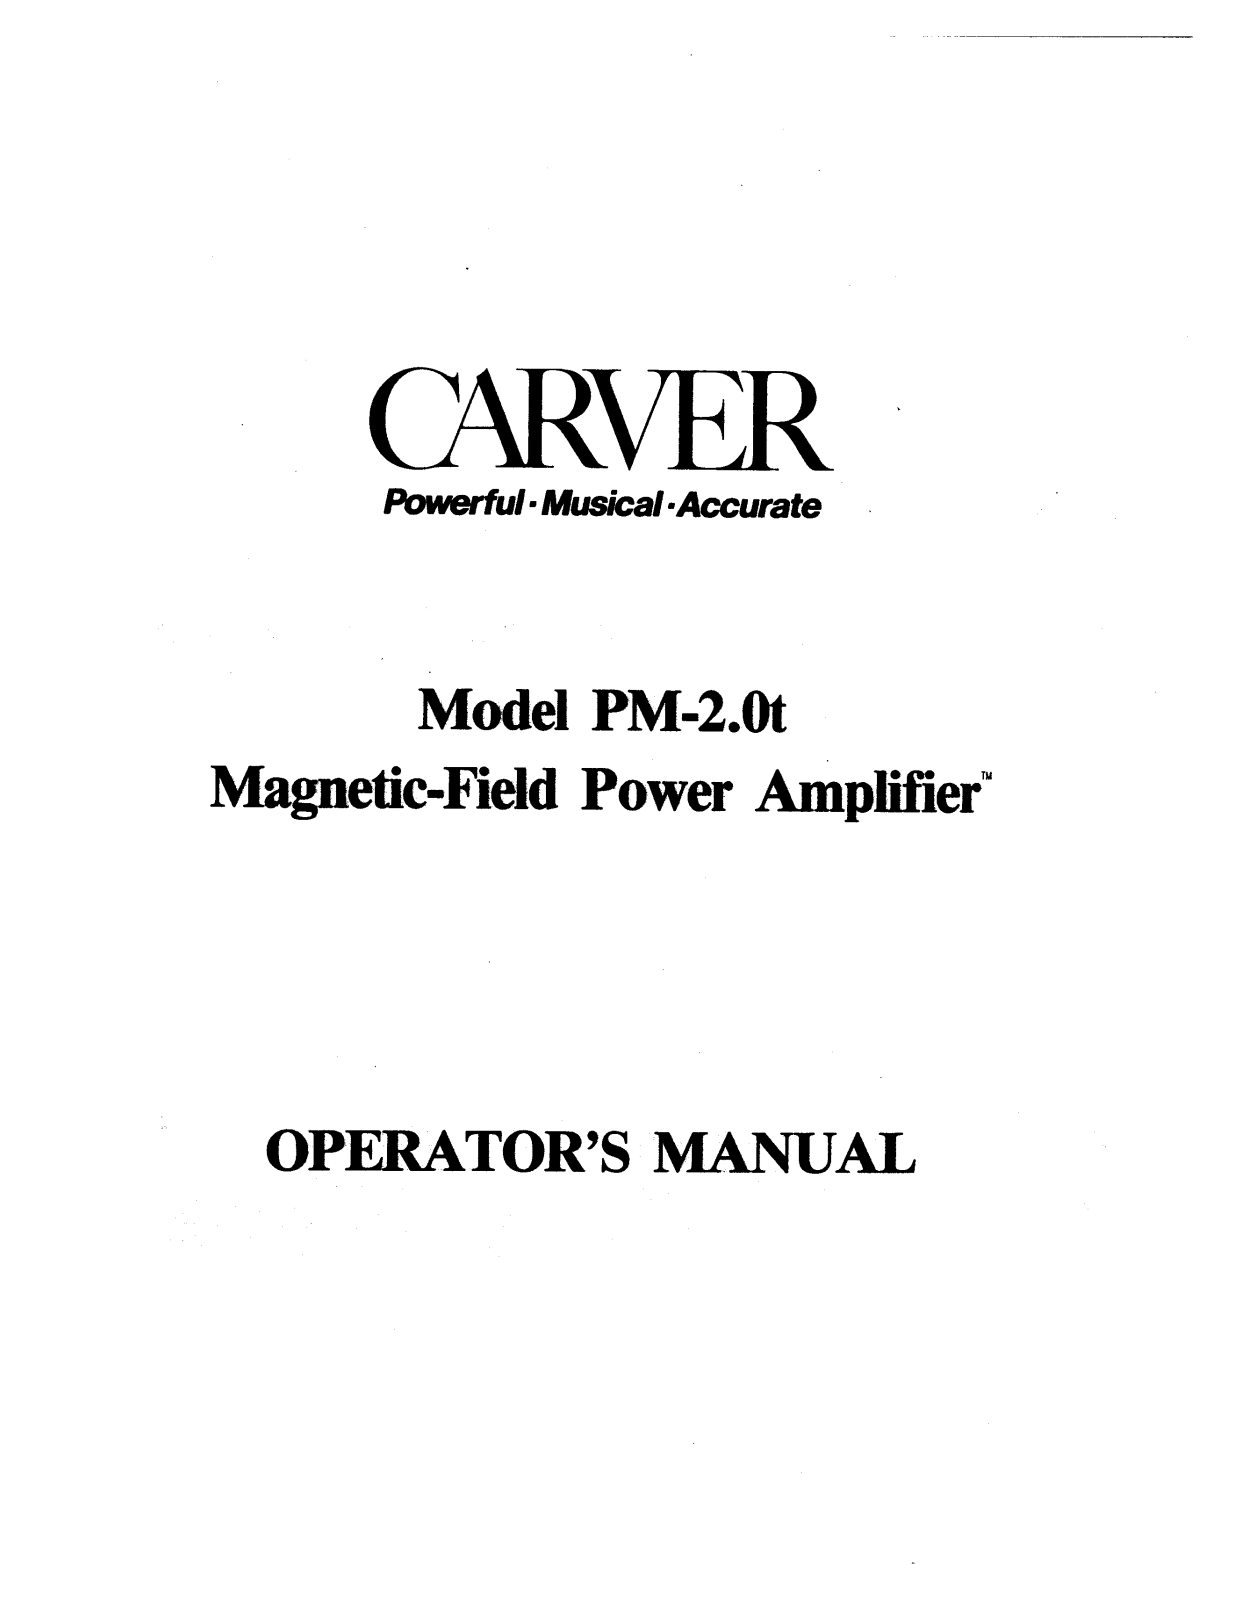 Carver PM-2.0-T Owners manual